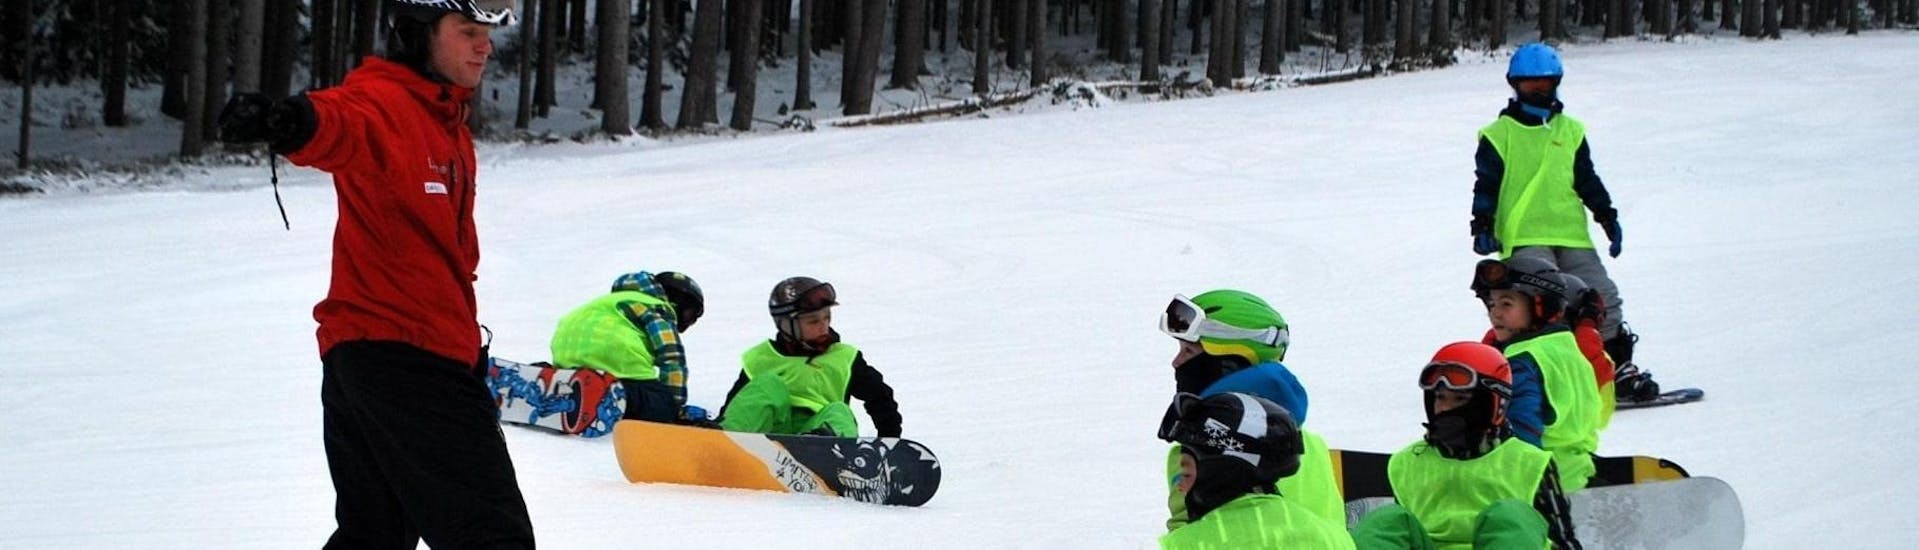 Snowboard Lessons for Kids (8-15 years) - Group Lesson.